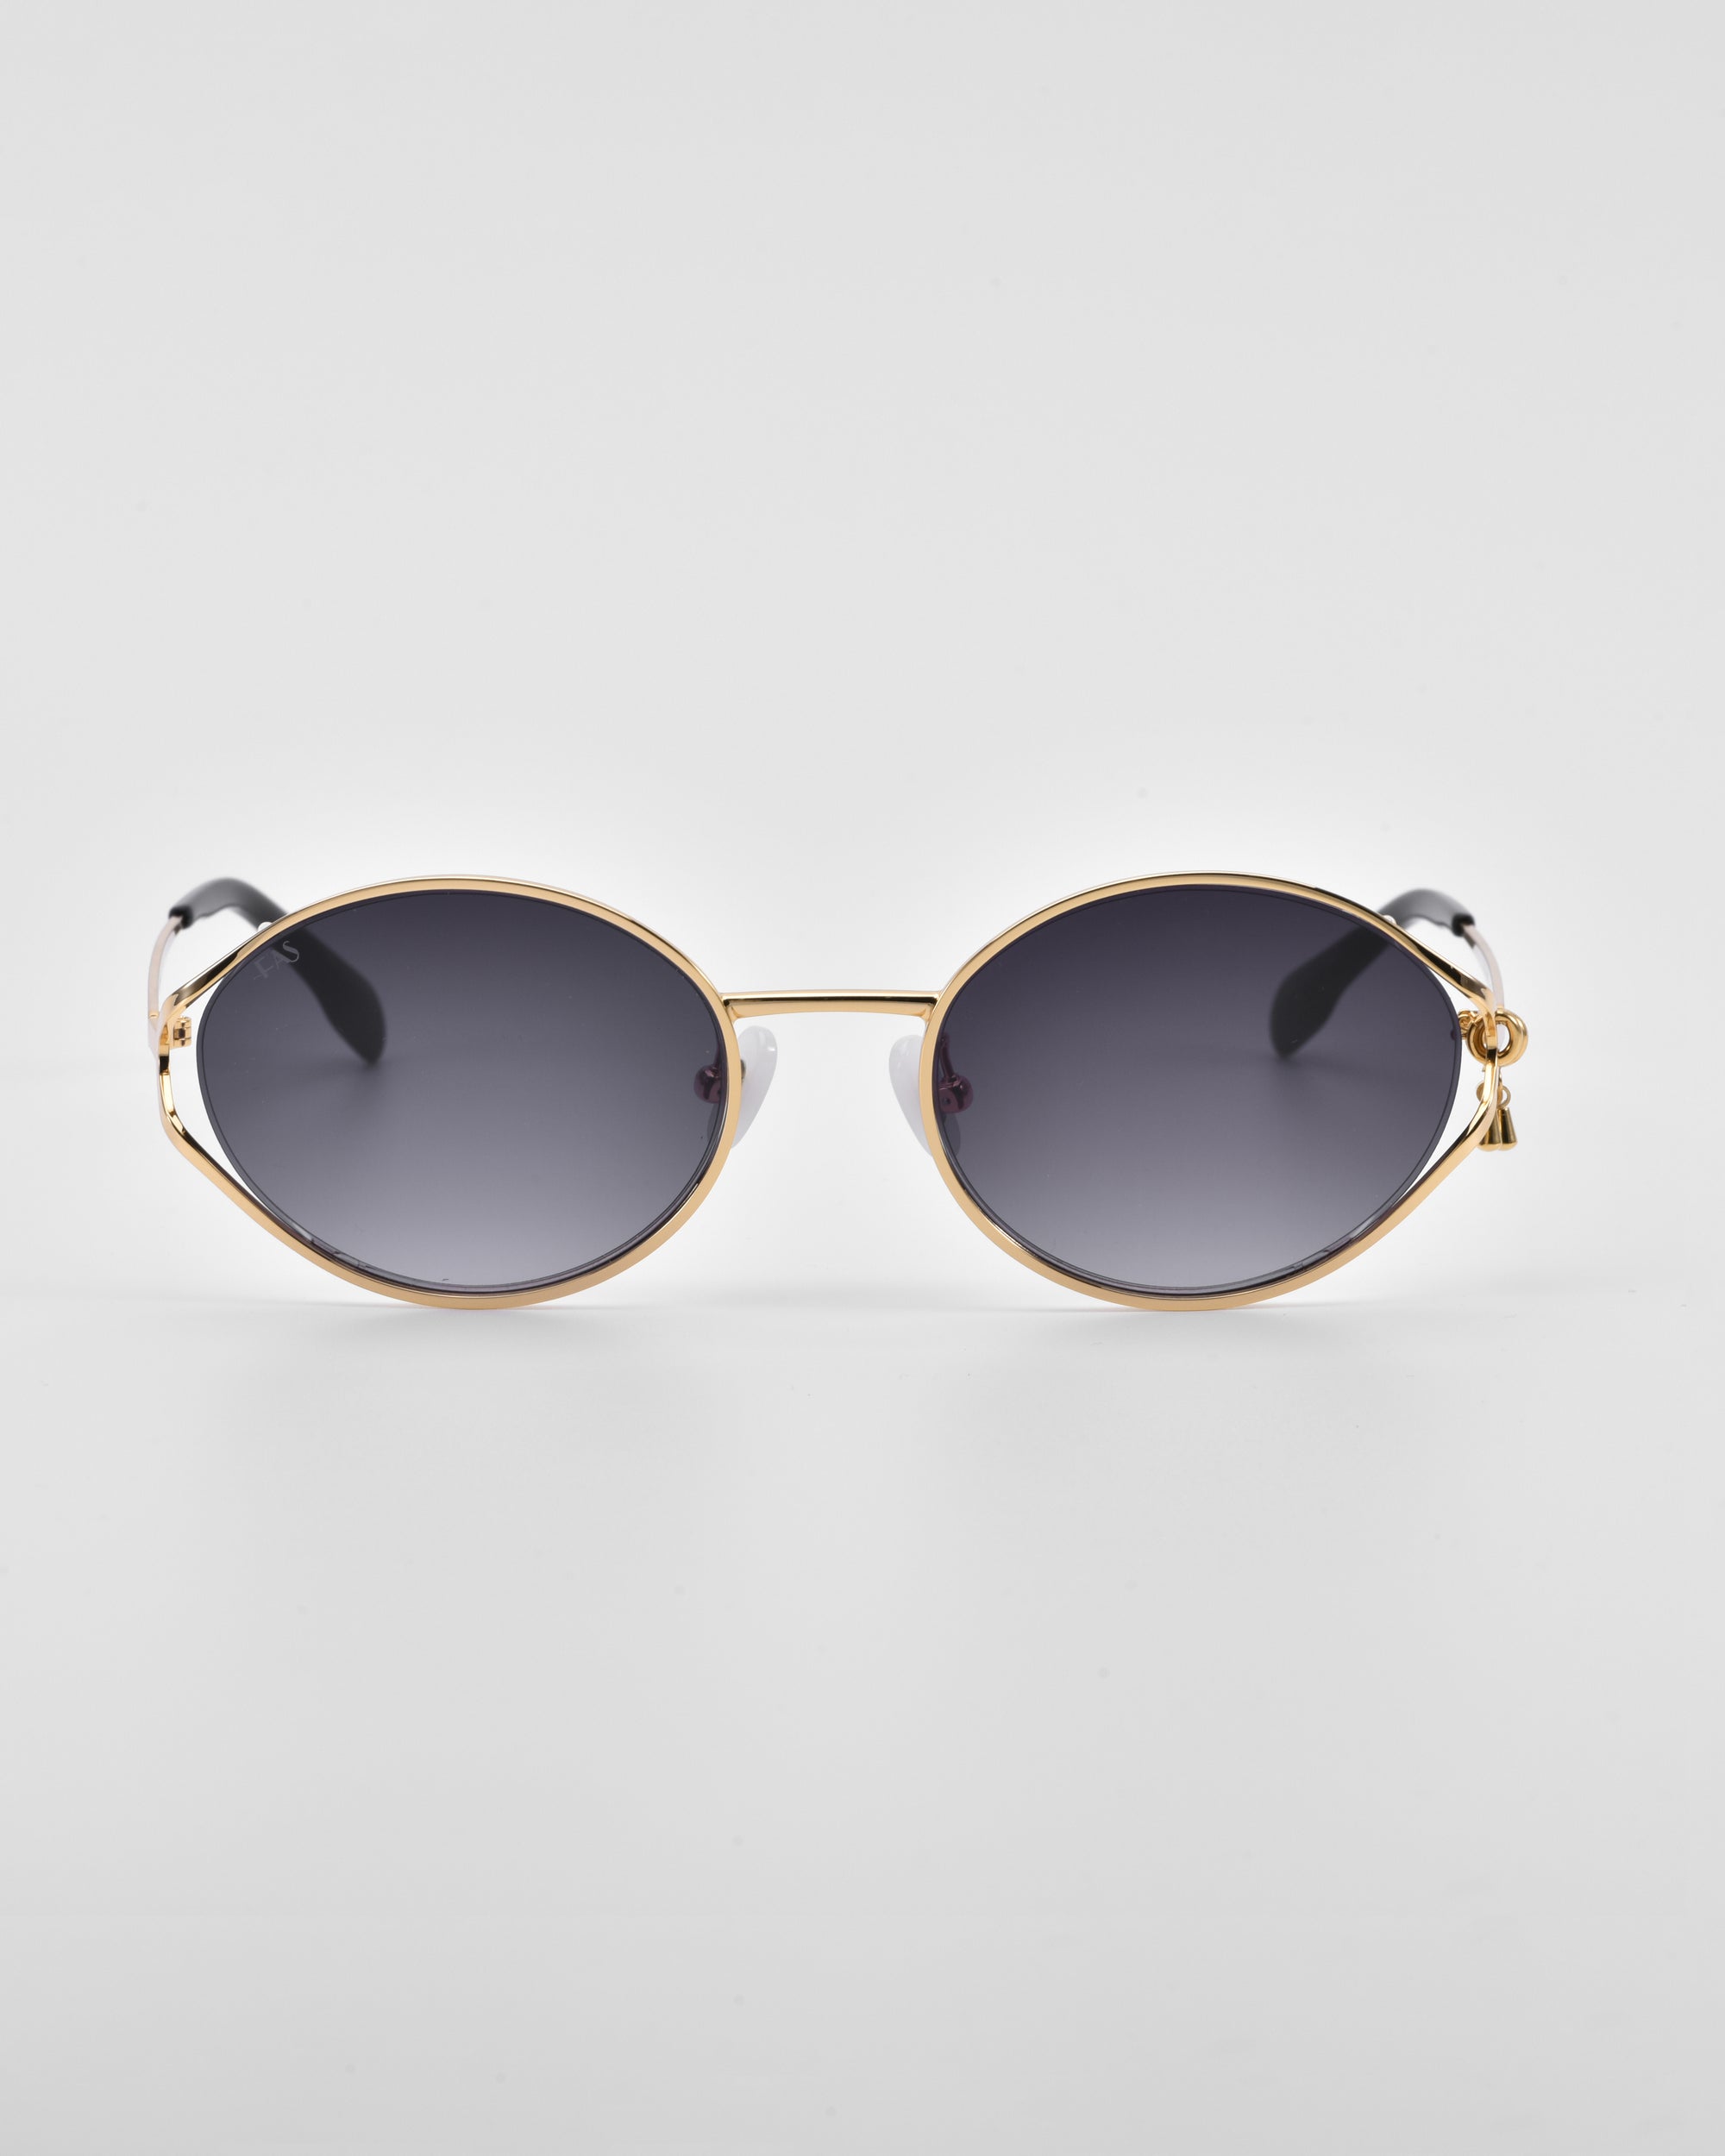 A pair of stylish Sky sunglasses by For Art's Sake® with round, dark-tinted lenses and a golden metal frame. Featuring 18-karat gold detailing and sleek, minimalist design accents, the glasses come with natural jade-stone nose pads, set against a plain white background.